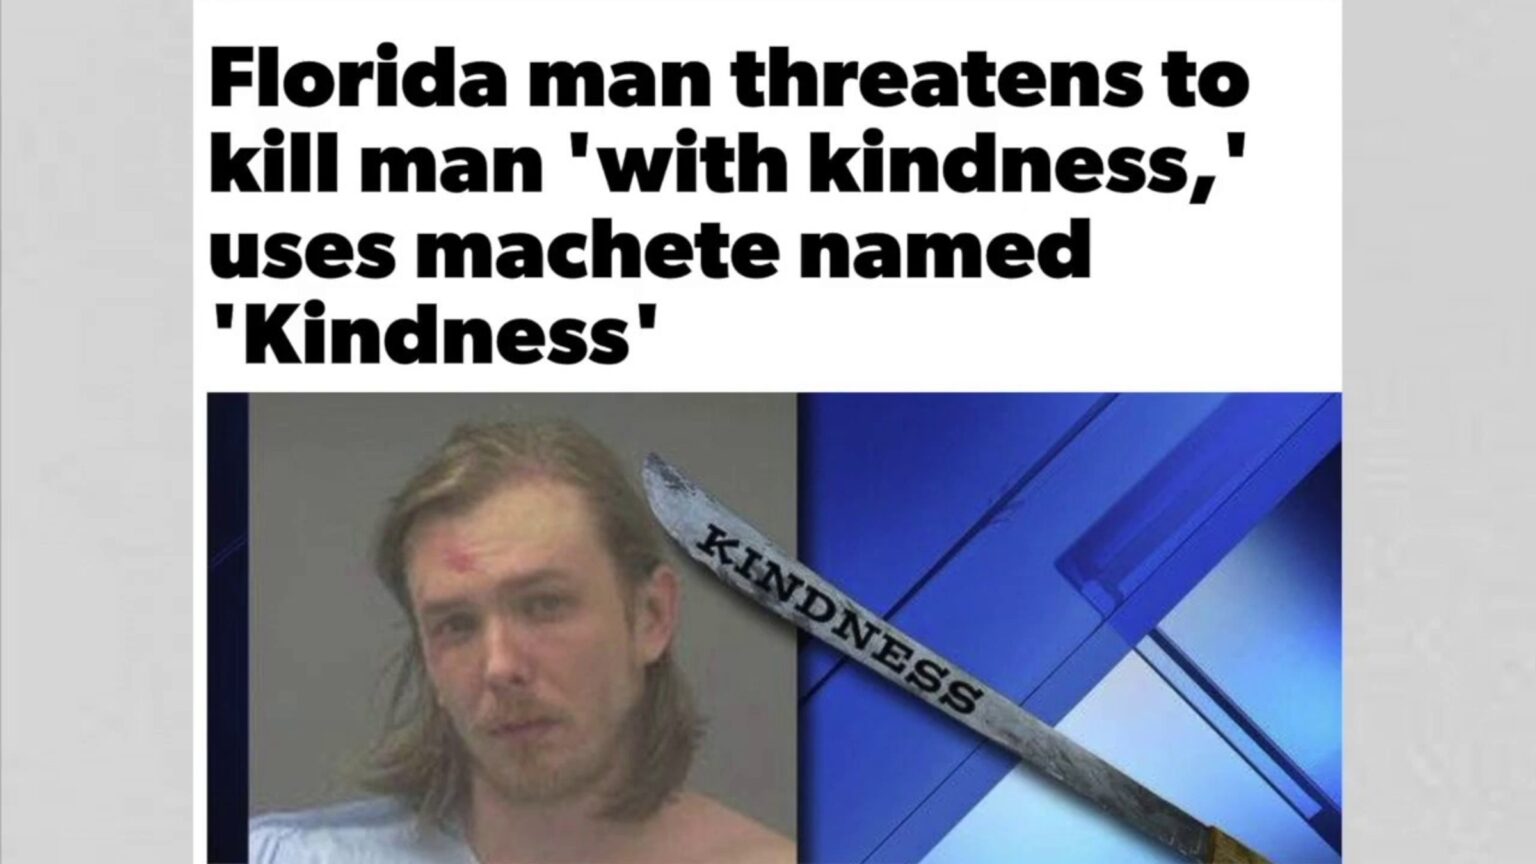 Florida Man, named from Florida headlines about wacky arrests in the Sunshine State. Here are some Karen-style headlines to get you laughing.